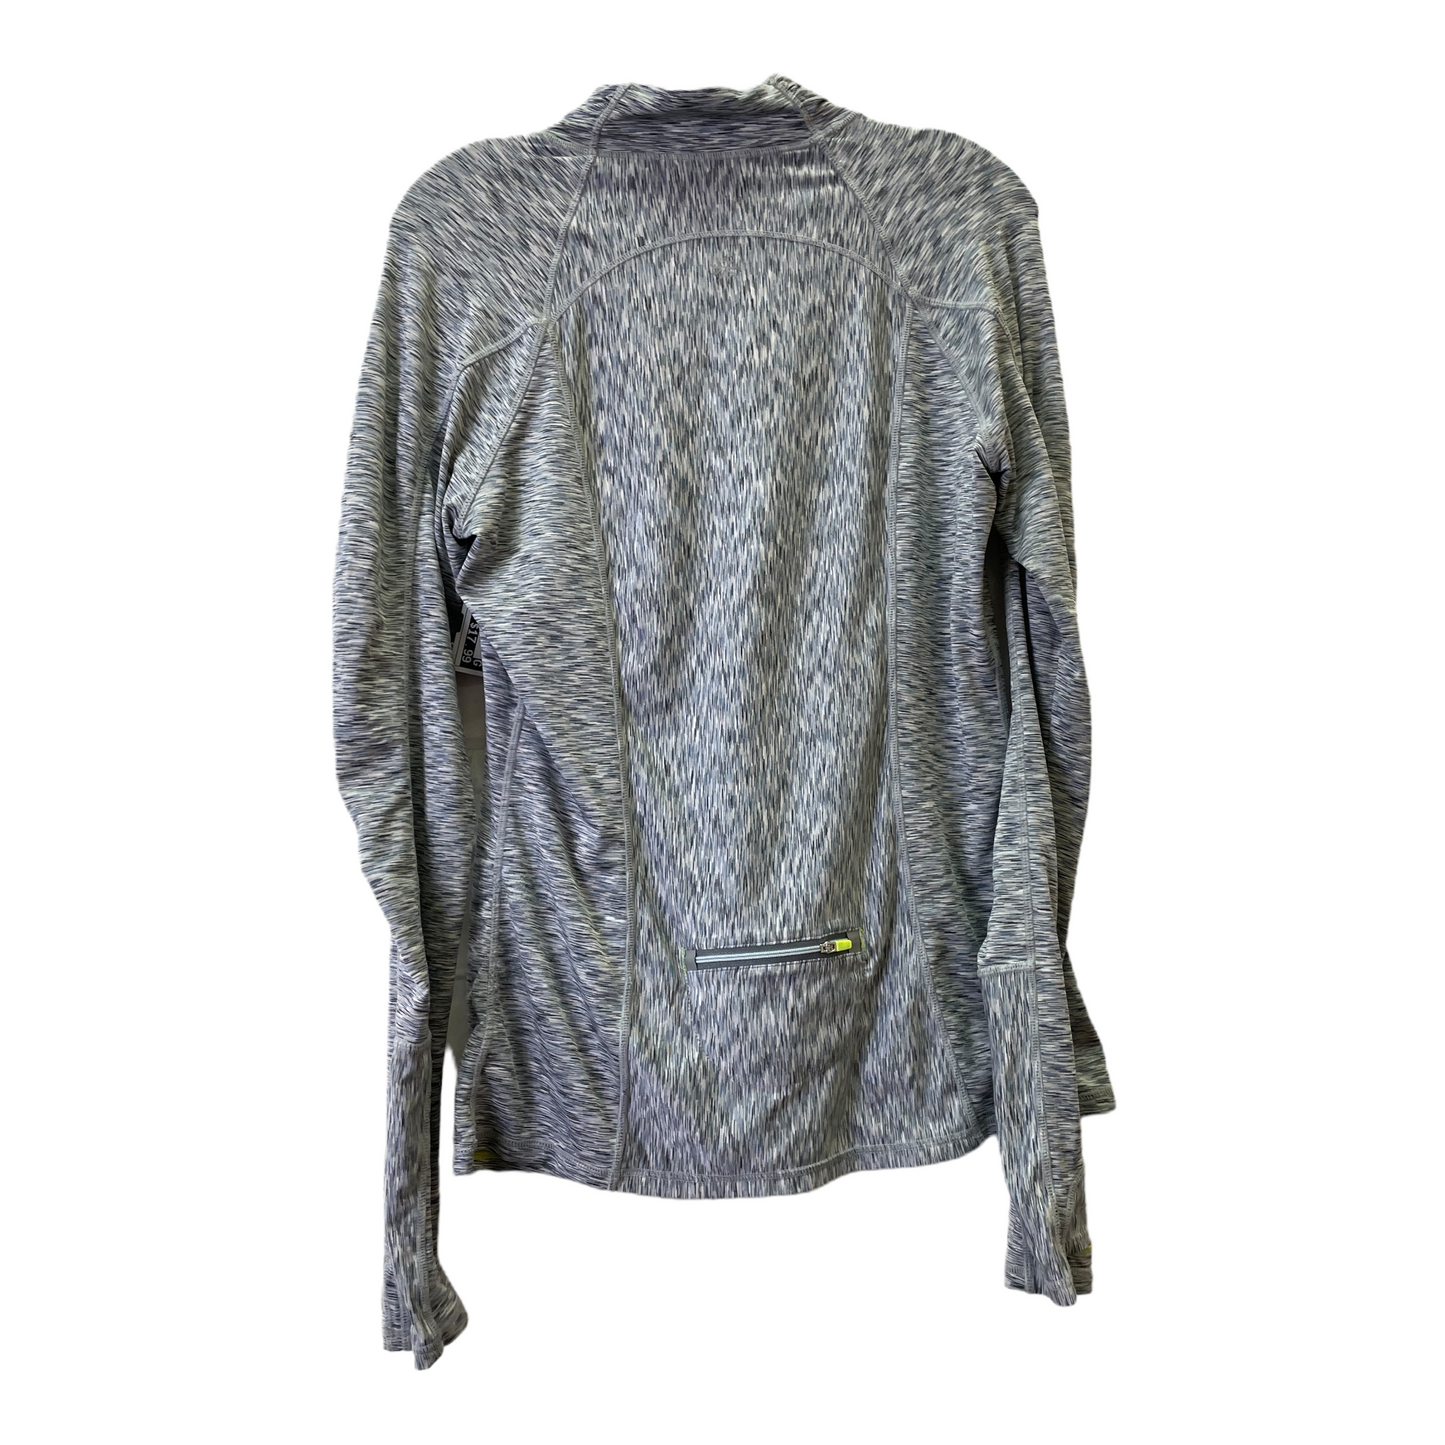 Grey Athletic Top Long Sleeve Collar By Athleta, Size: M